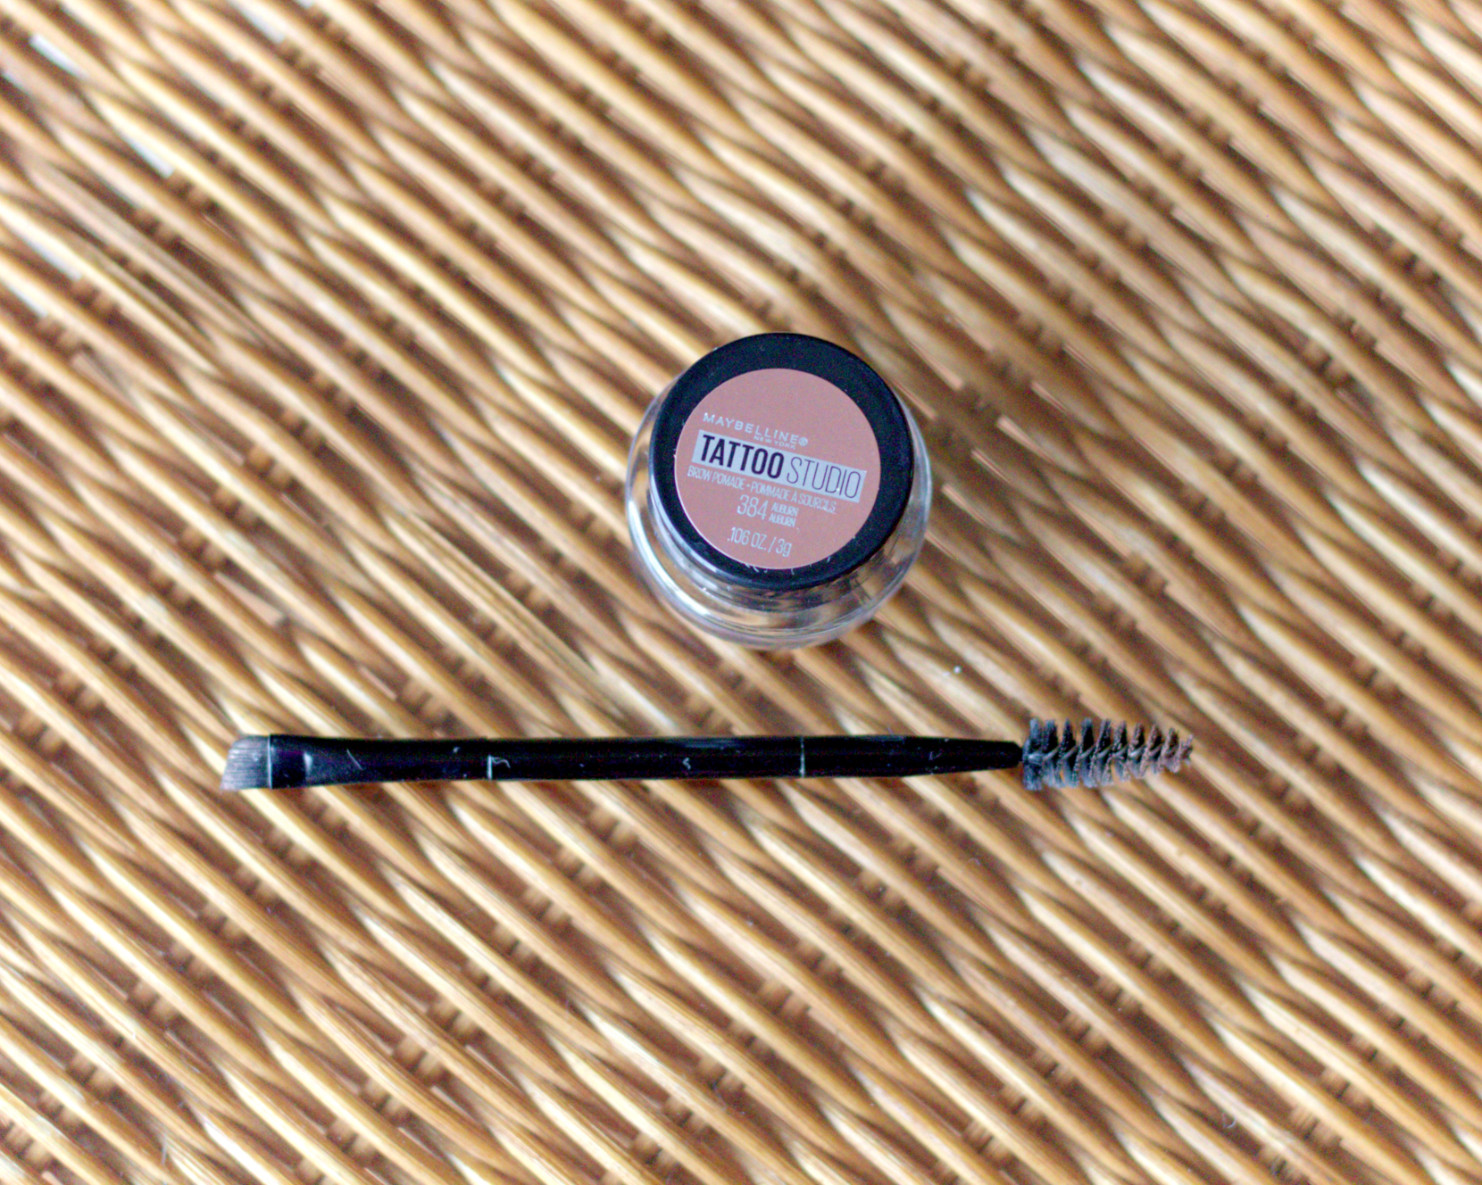 Maybelline Tattoo Studio Brow Pomade With Brush